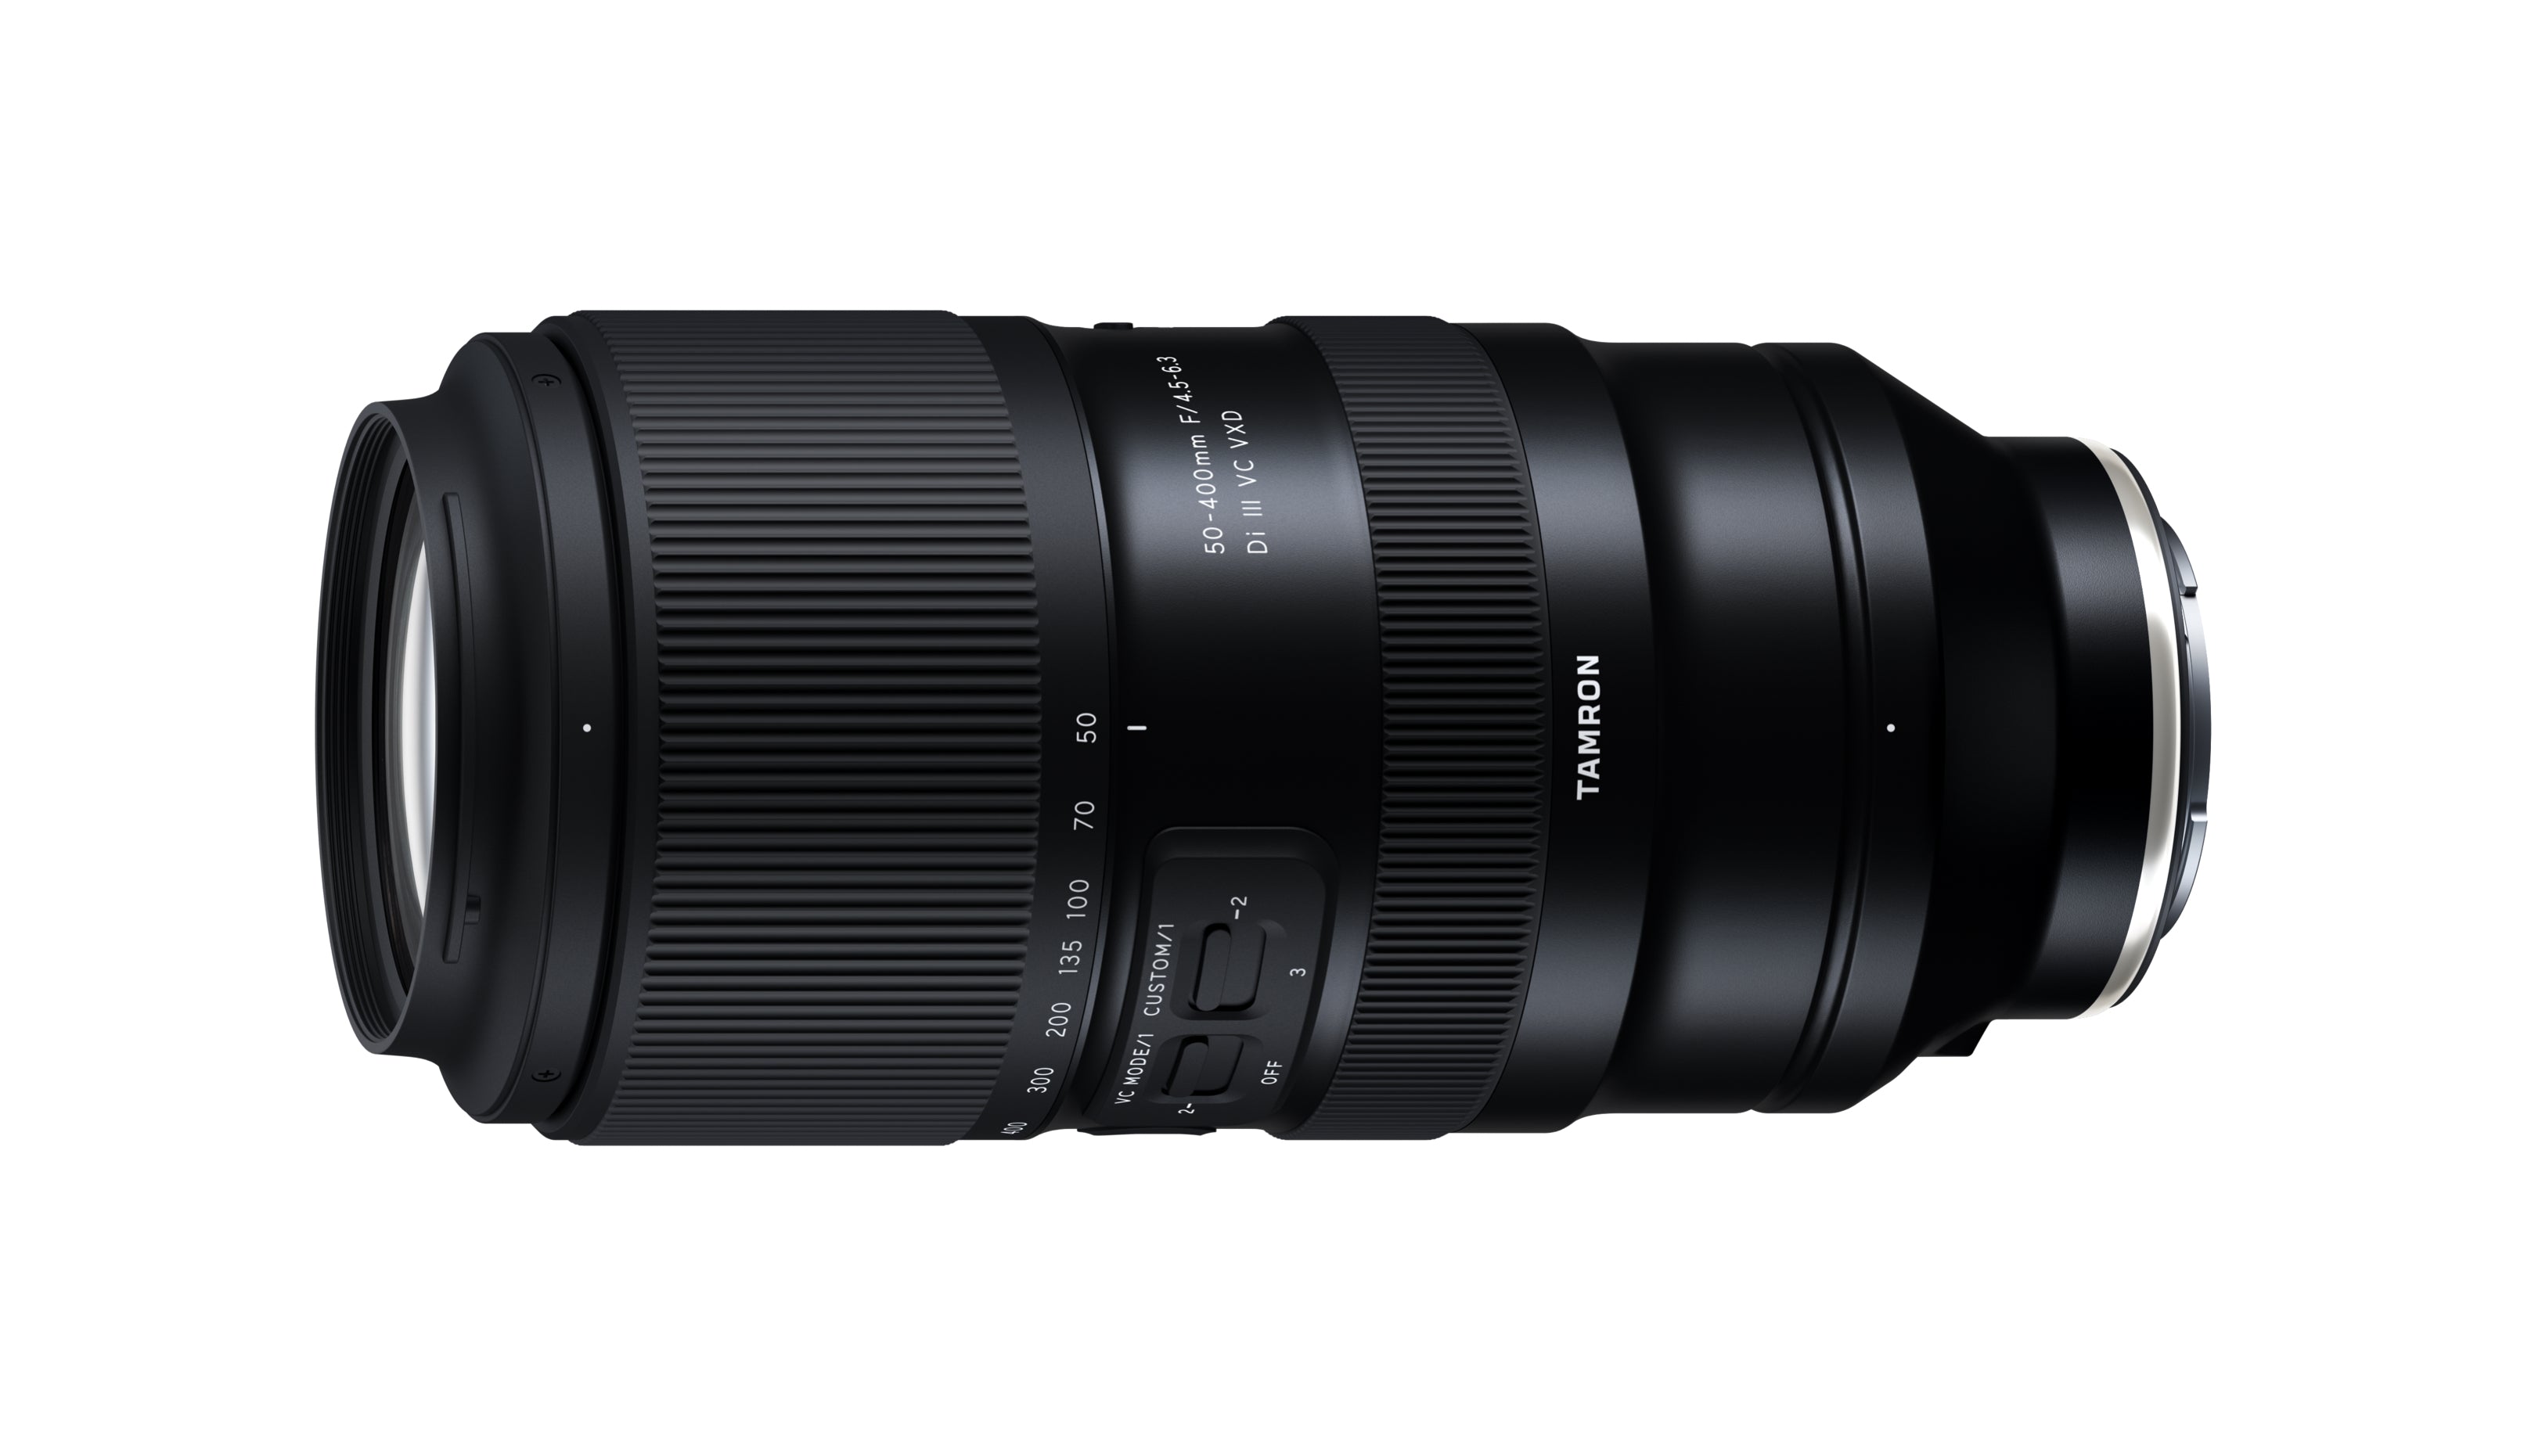 Product Image of Tamron 50-400mm F4.5-6.3 Di III VXD for Sony FE Lens